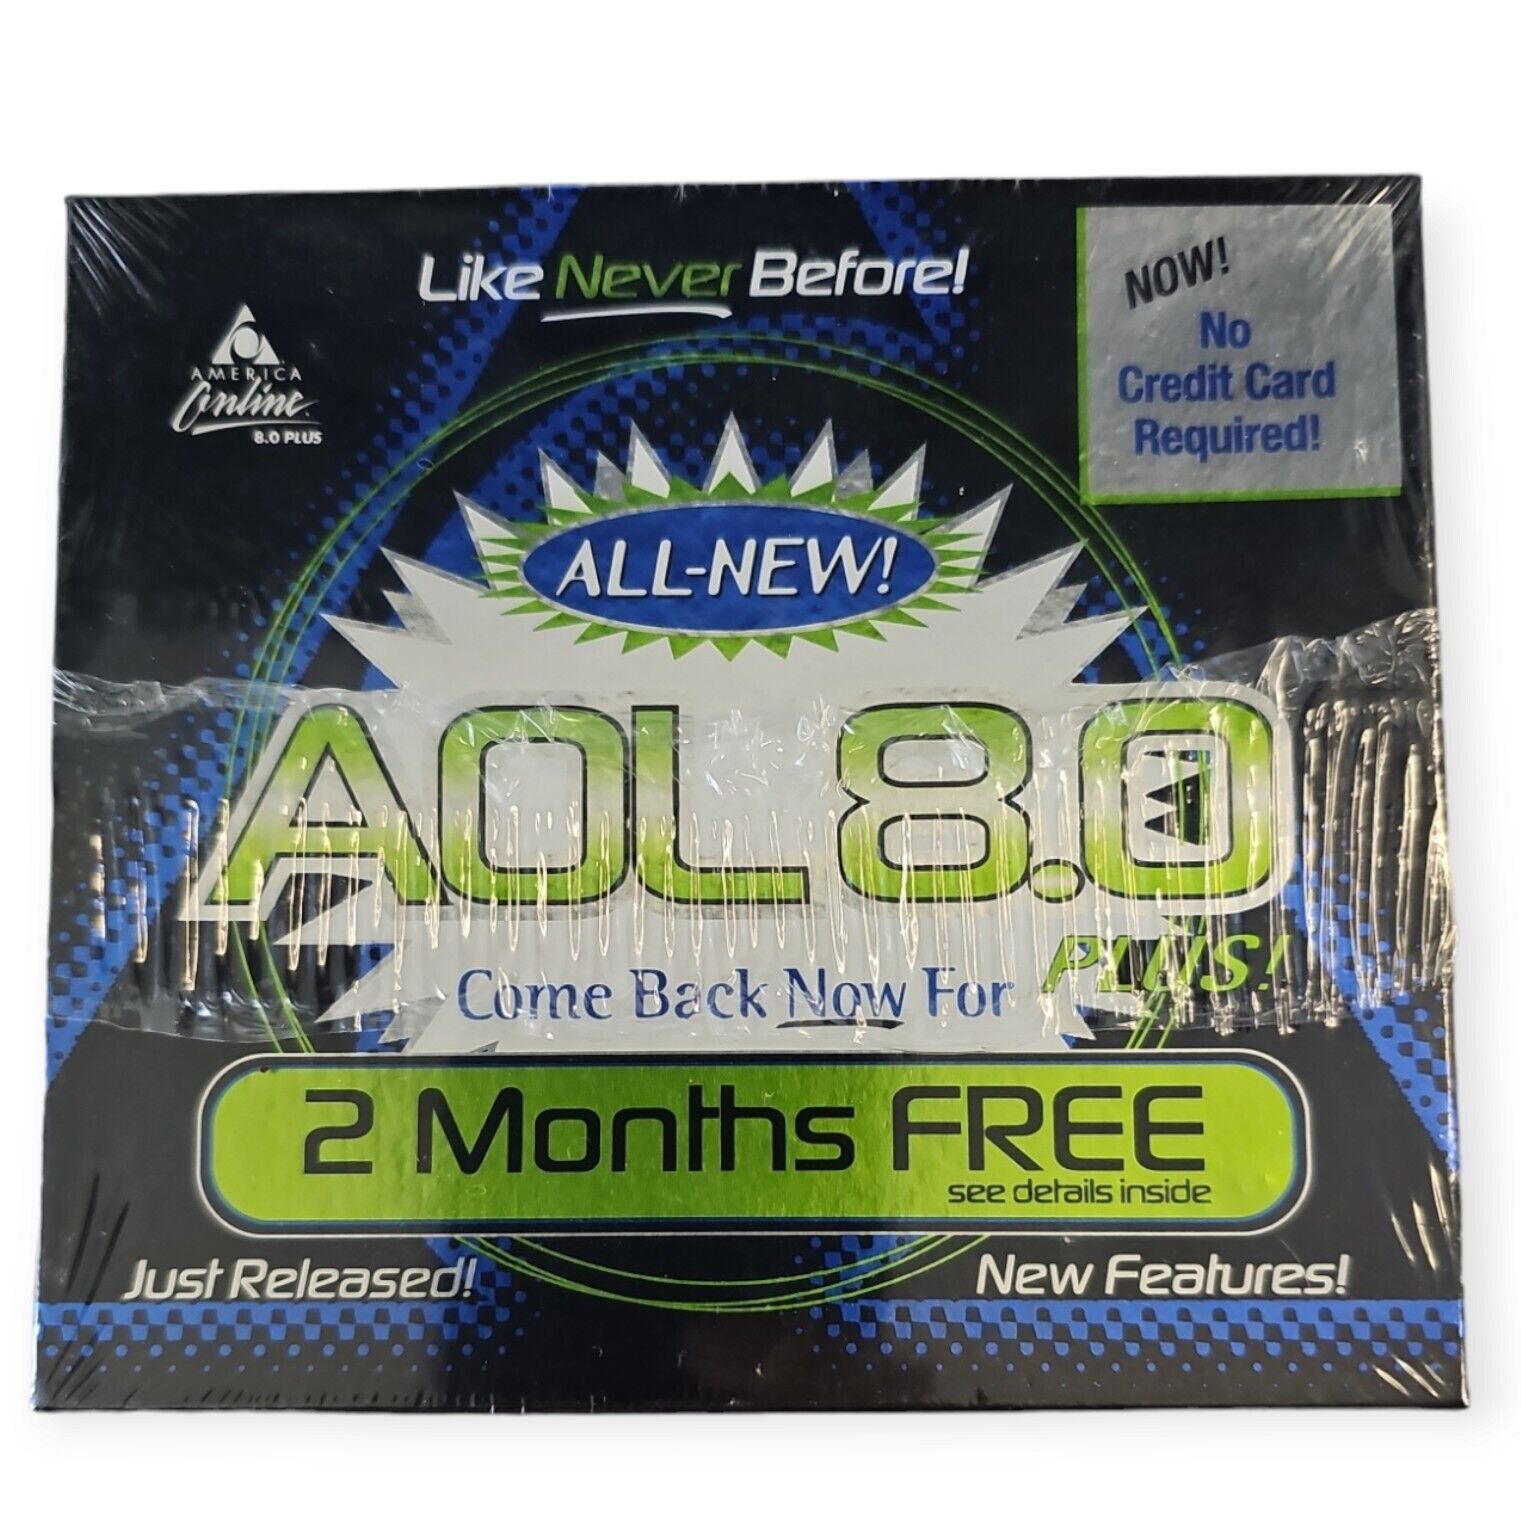 America Online AOL 8.0 Plus Mail Offer Disc SEALED